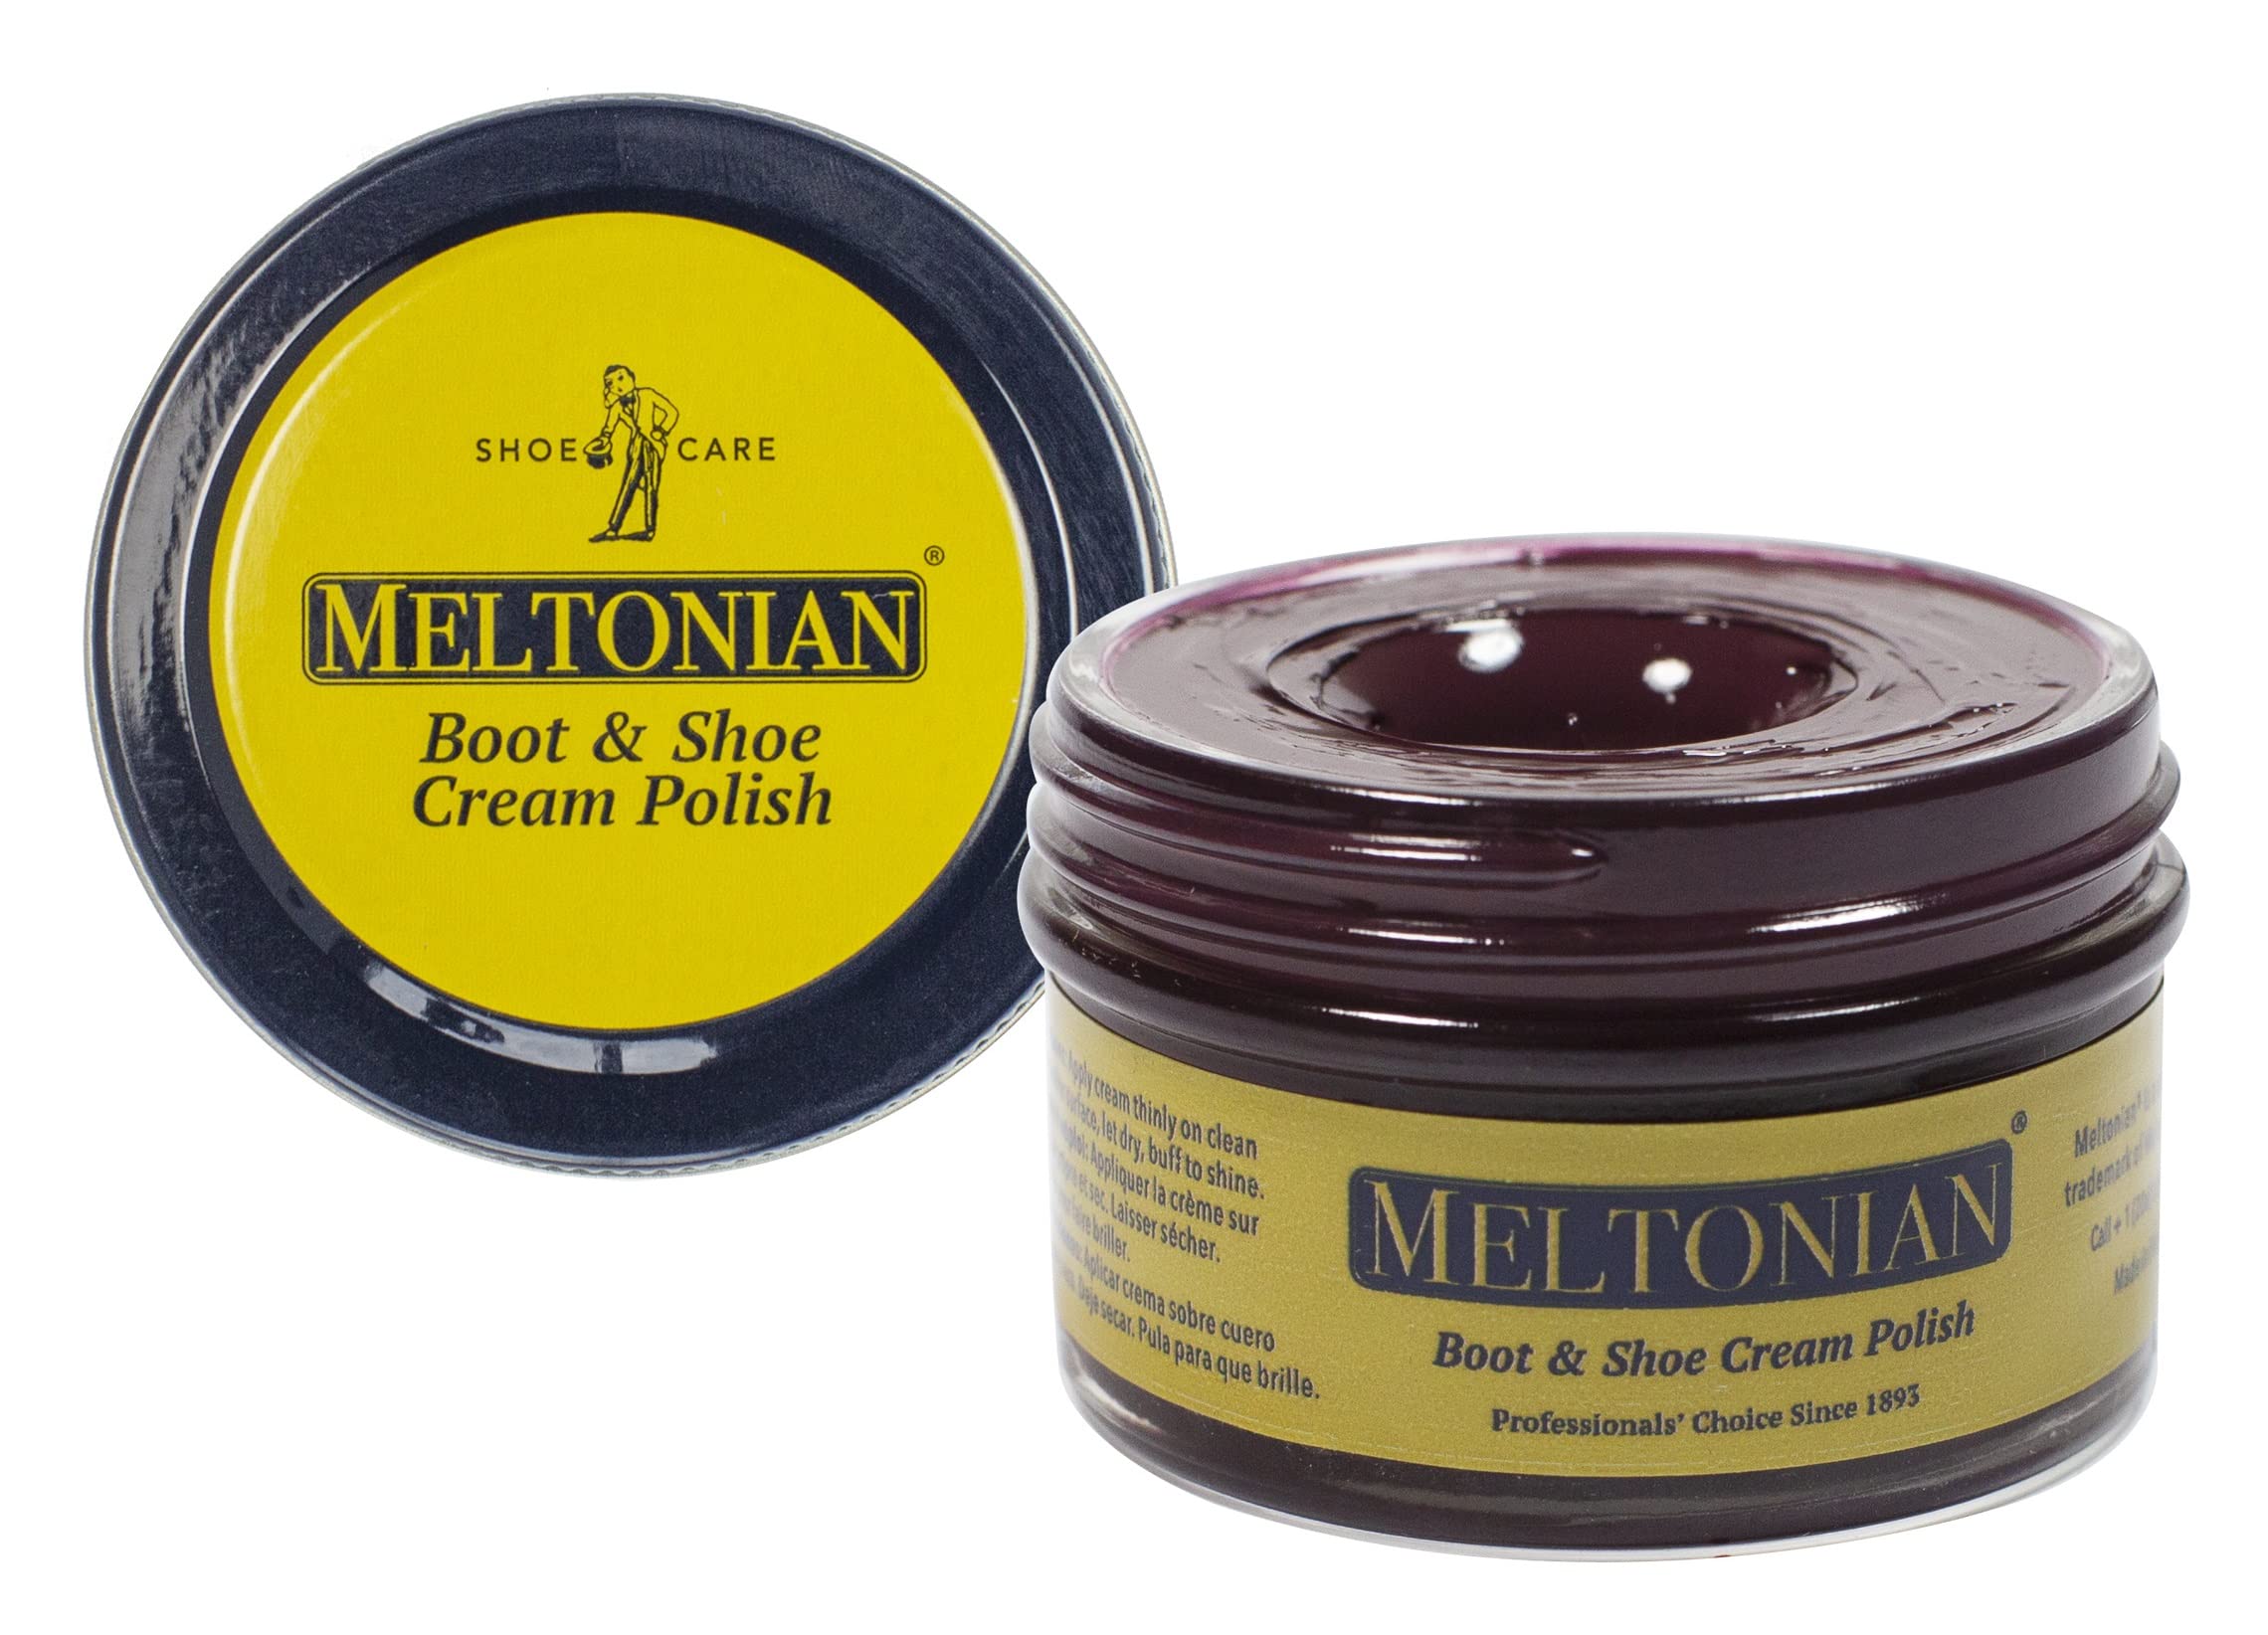 Meltonian cream  Burgundy  High Quality Shoe Polish for Leather  Boot, Purse, Furniture Wax  Leather conditioner  17 OZ Jar